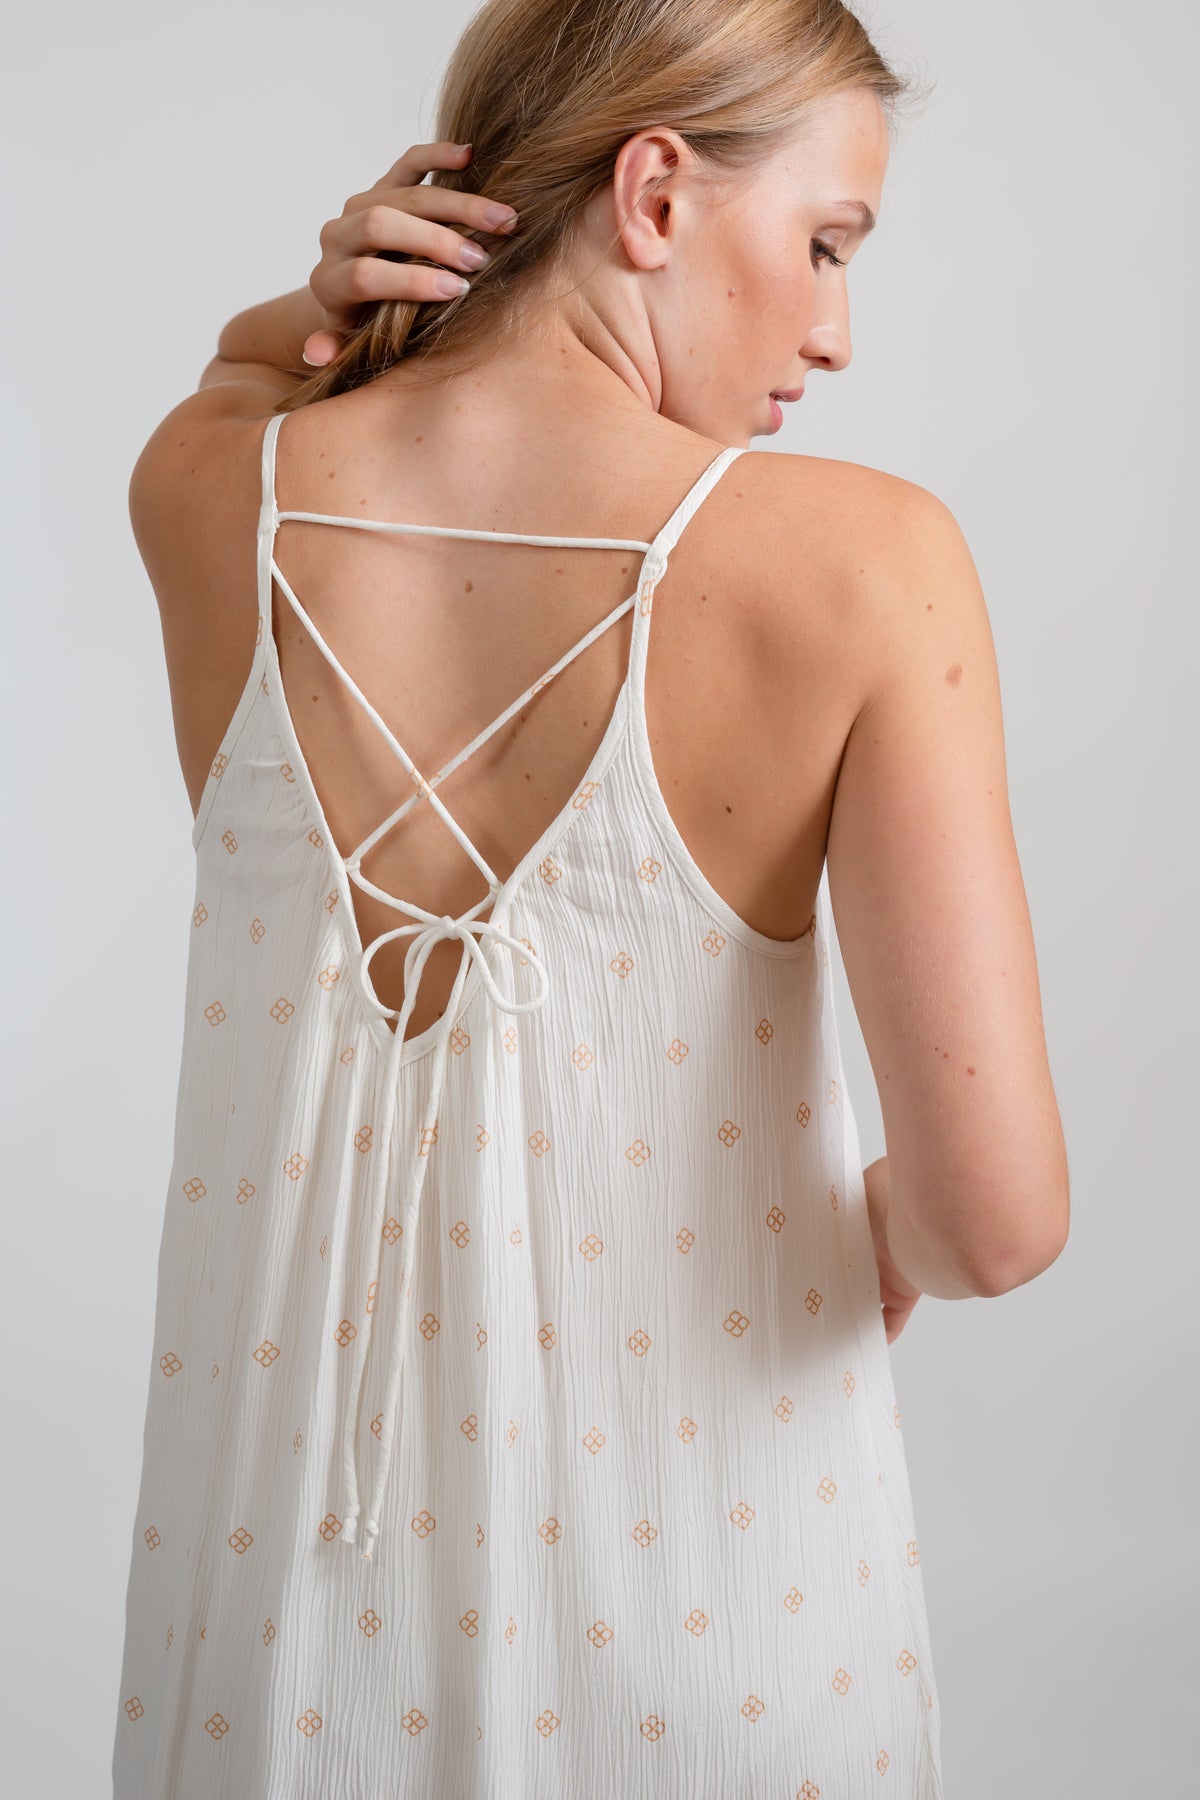 the back of a blonde hair model wearing a strappy vacation feel white with gold dot print dress looking to the side